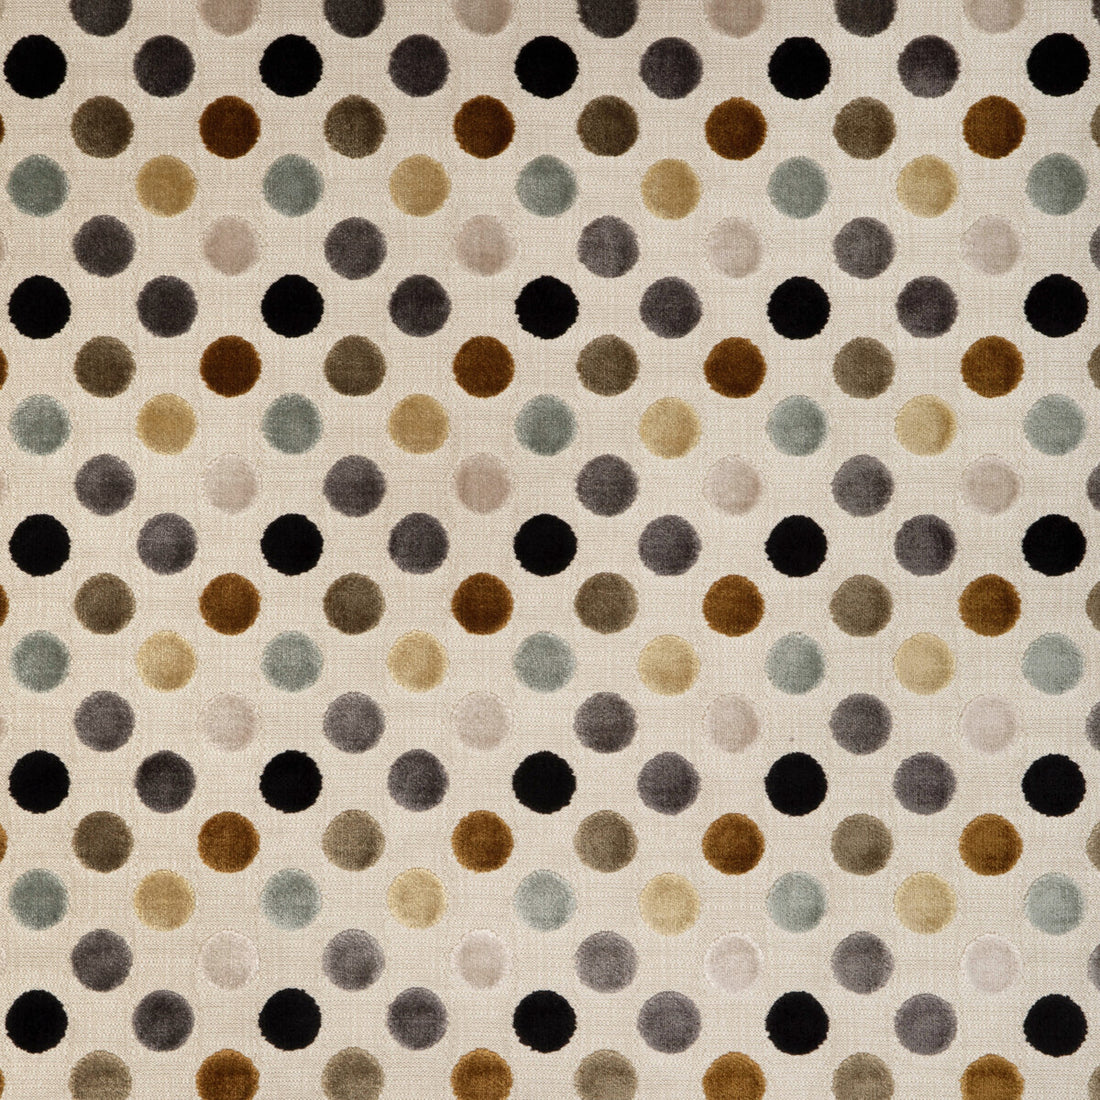 Dot Spot fabric in moonlit color - pattern 36888.616.0 - by Kravet Design in the Mid-Century Modern collection